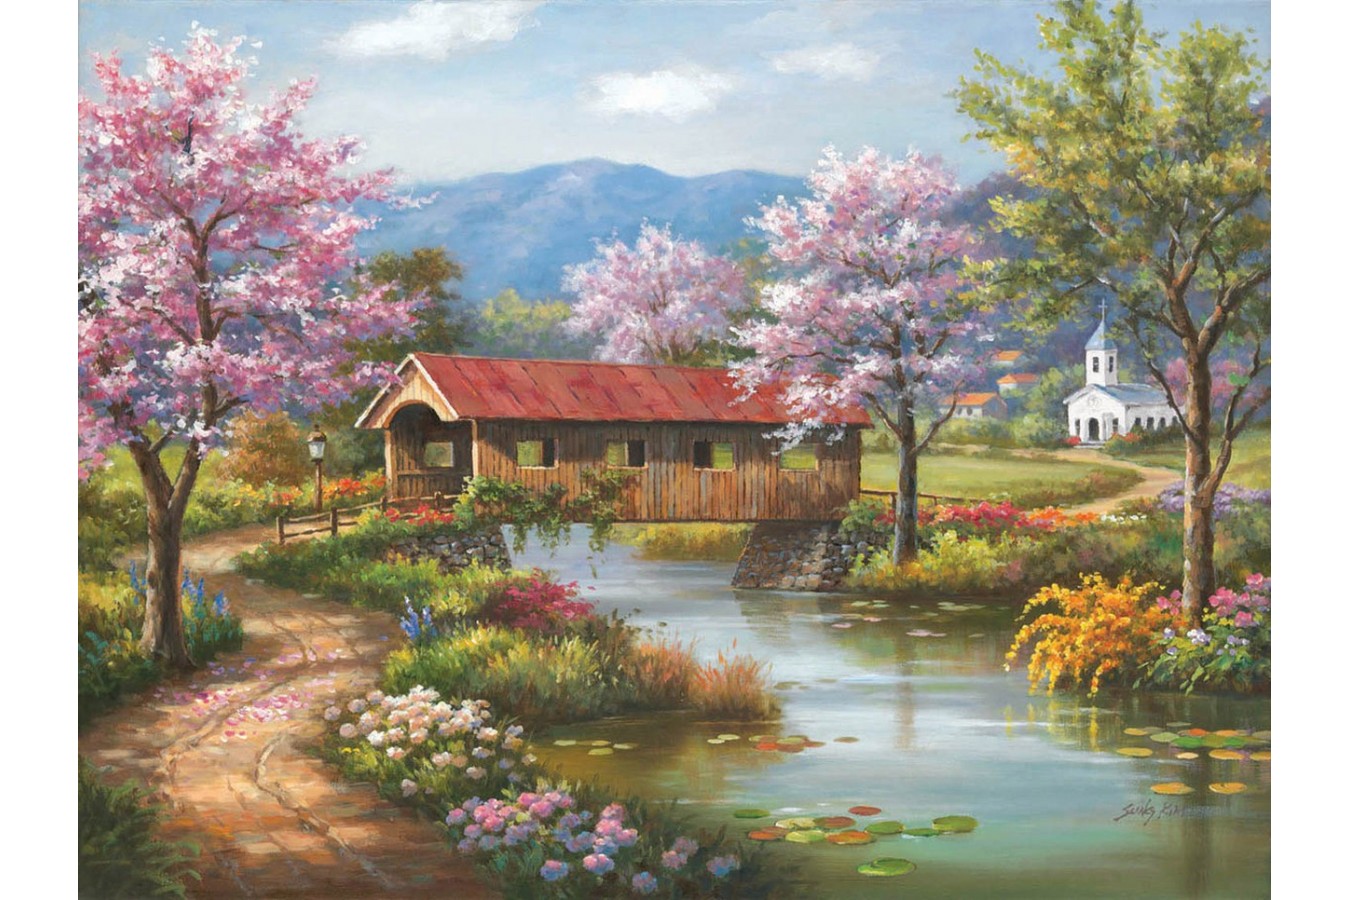 Puzzle 1000 piese SunsOut - Covered Bridge in Spring (Sunsout-36607)